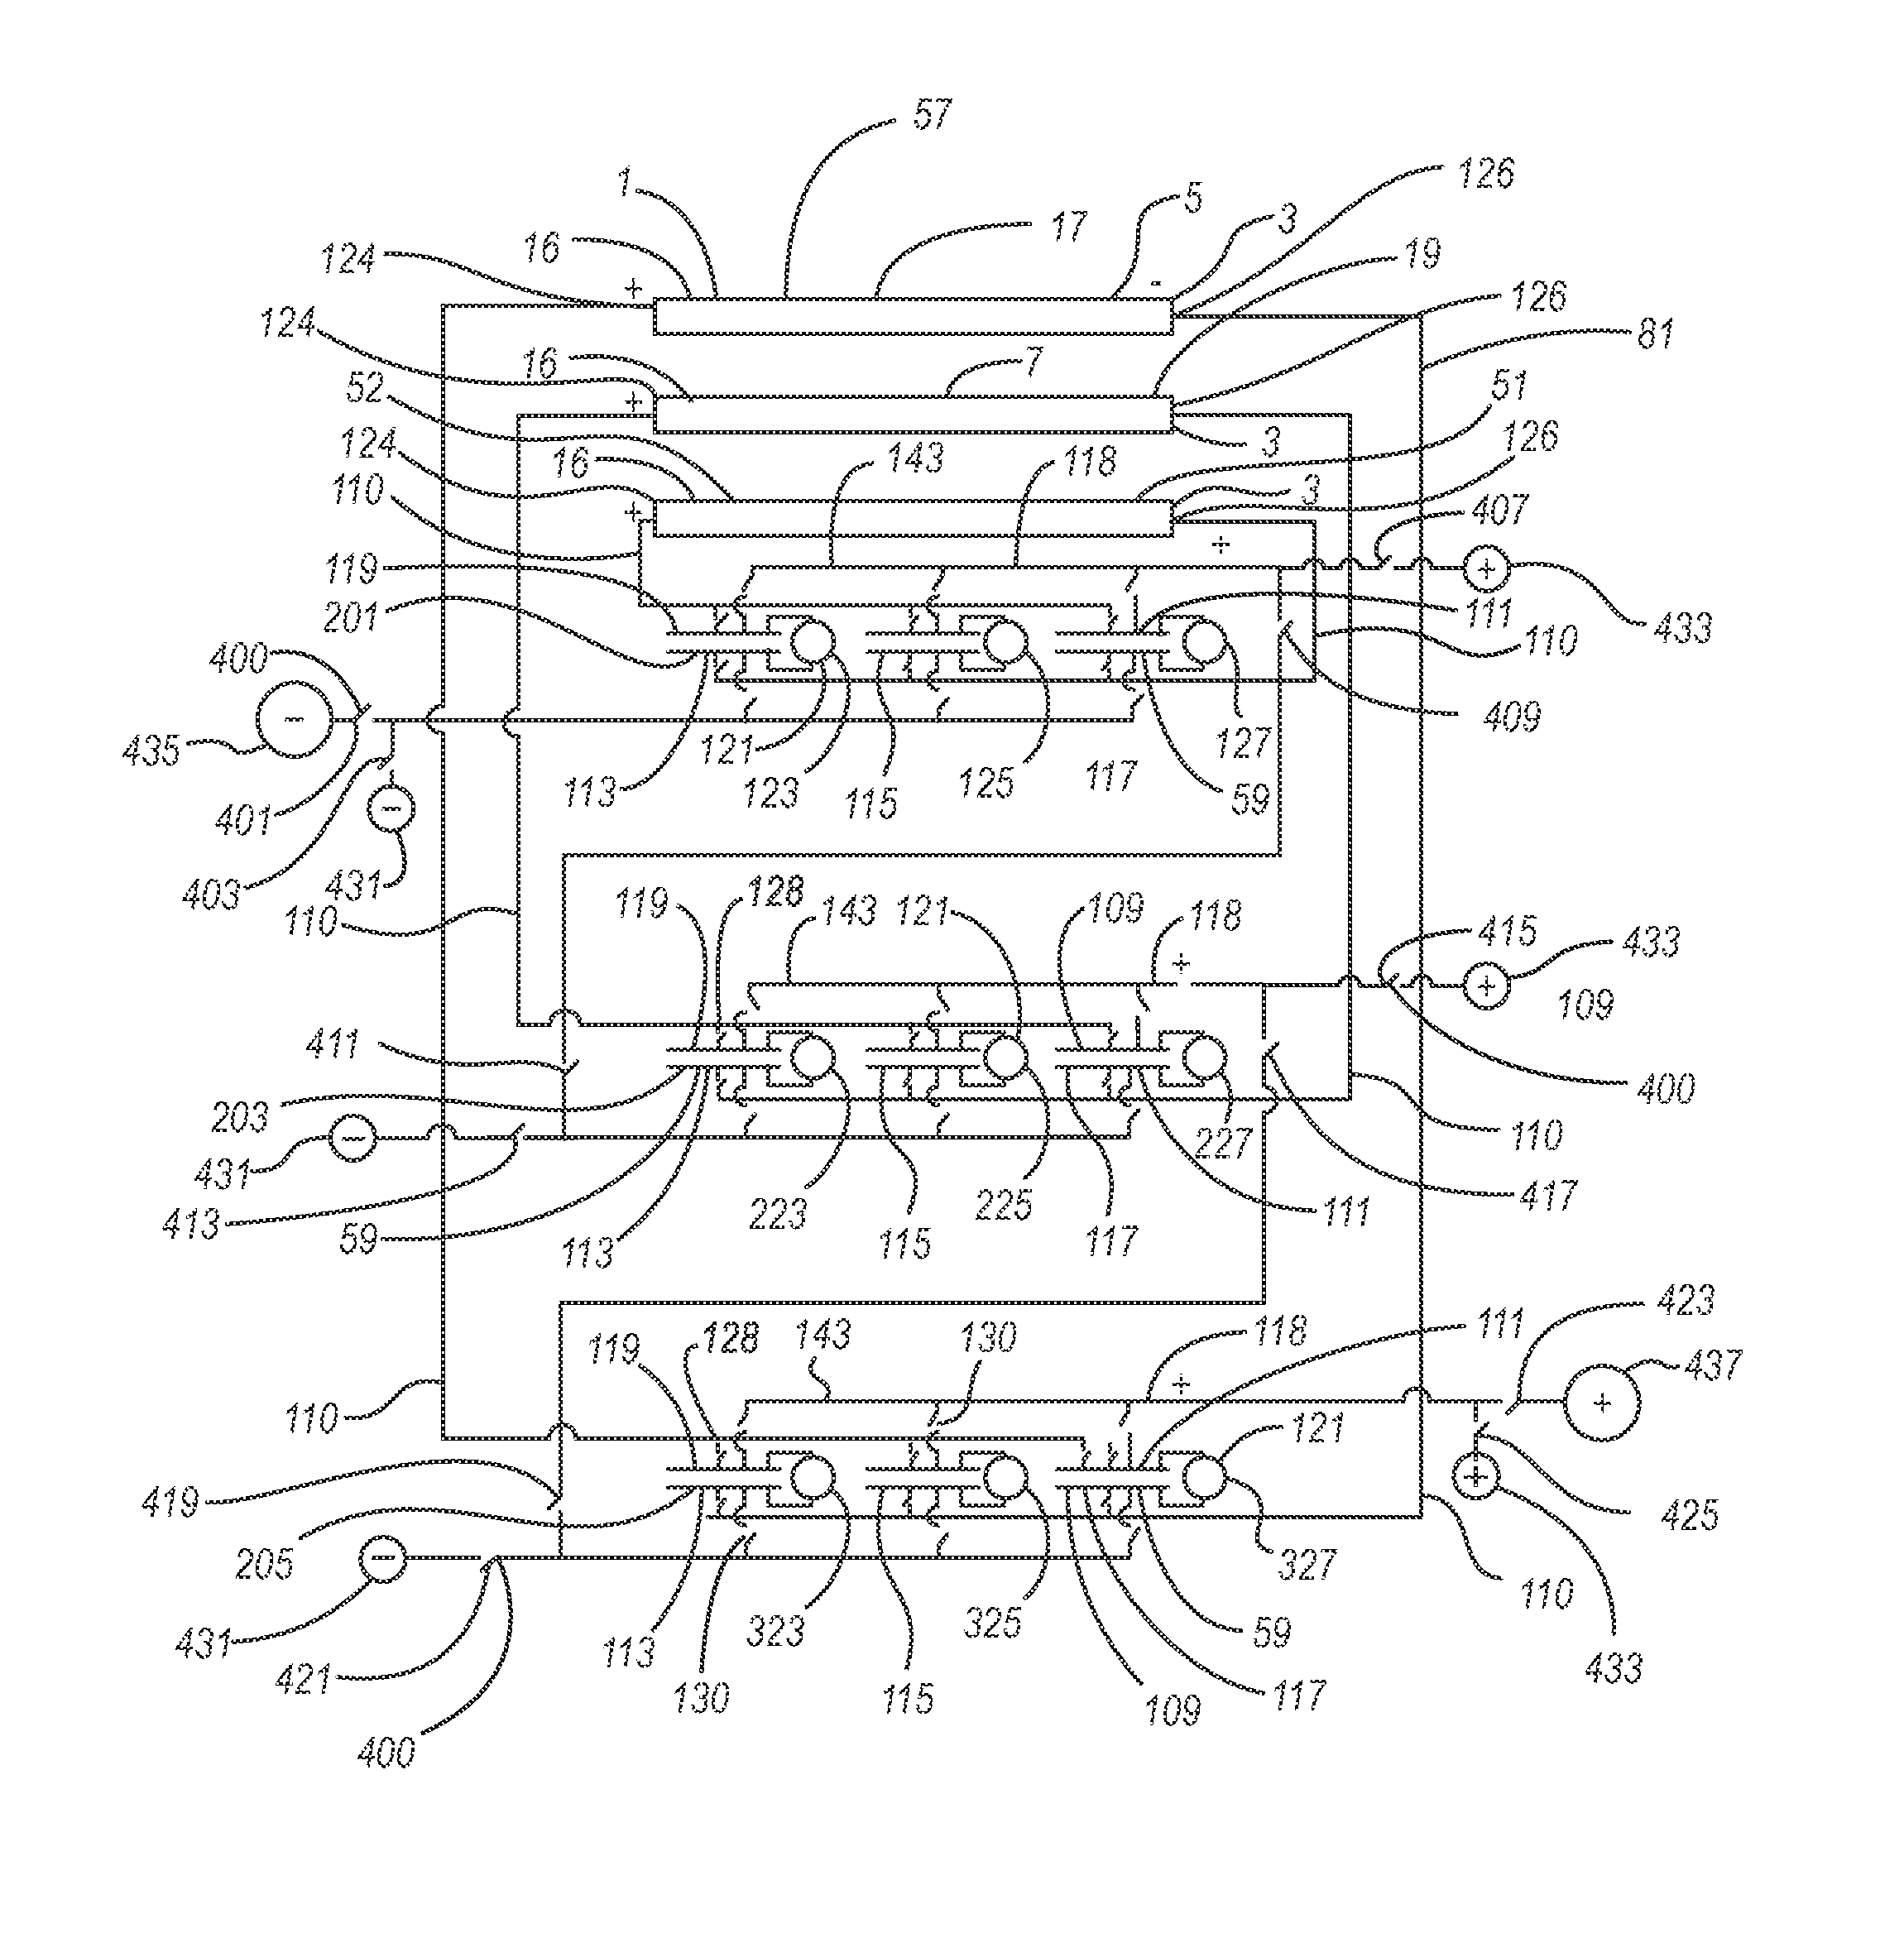 Capacitor enhanced multi-element photovoltaic cell